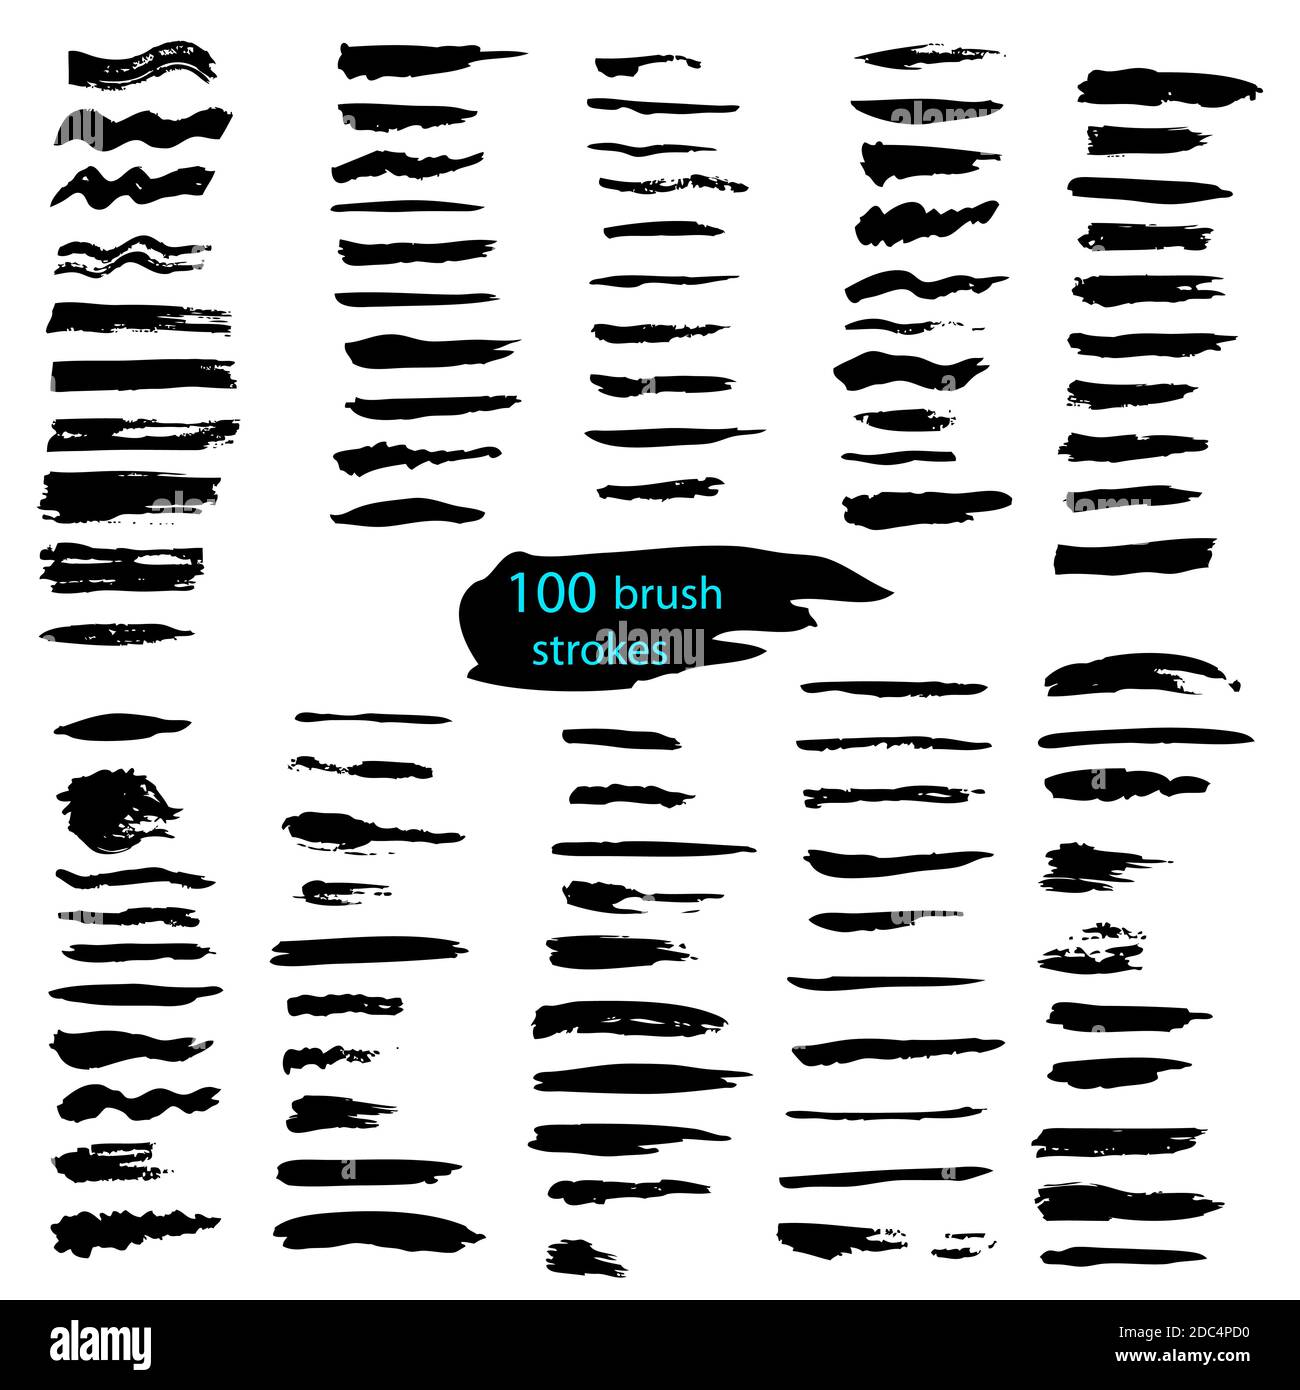 Big set of 100 black brush strokes. Hand drawn vector texture and